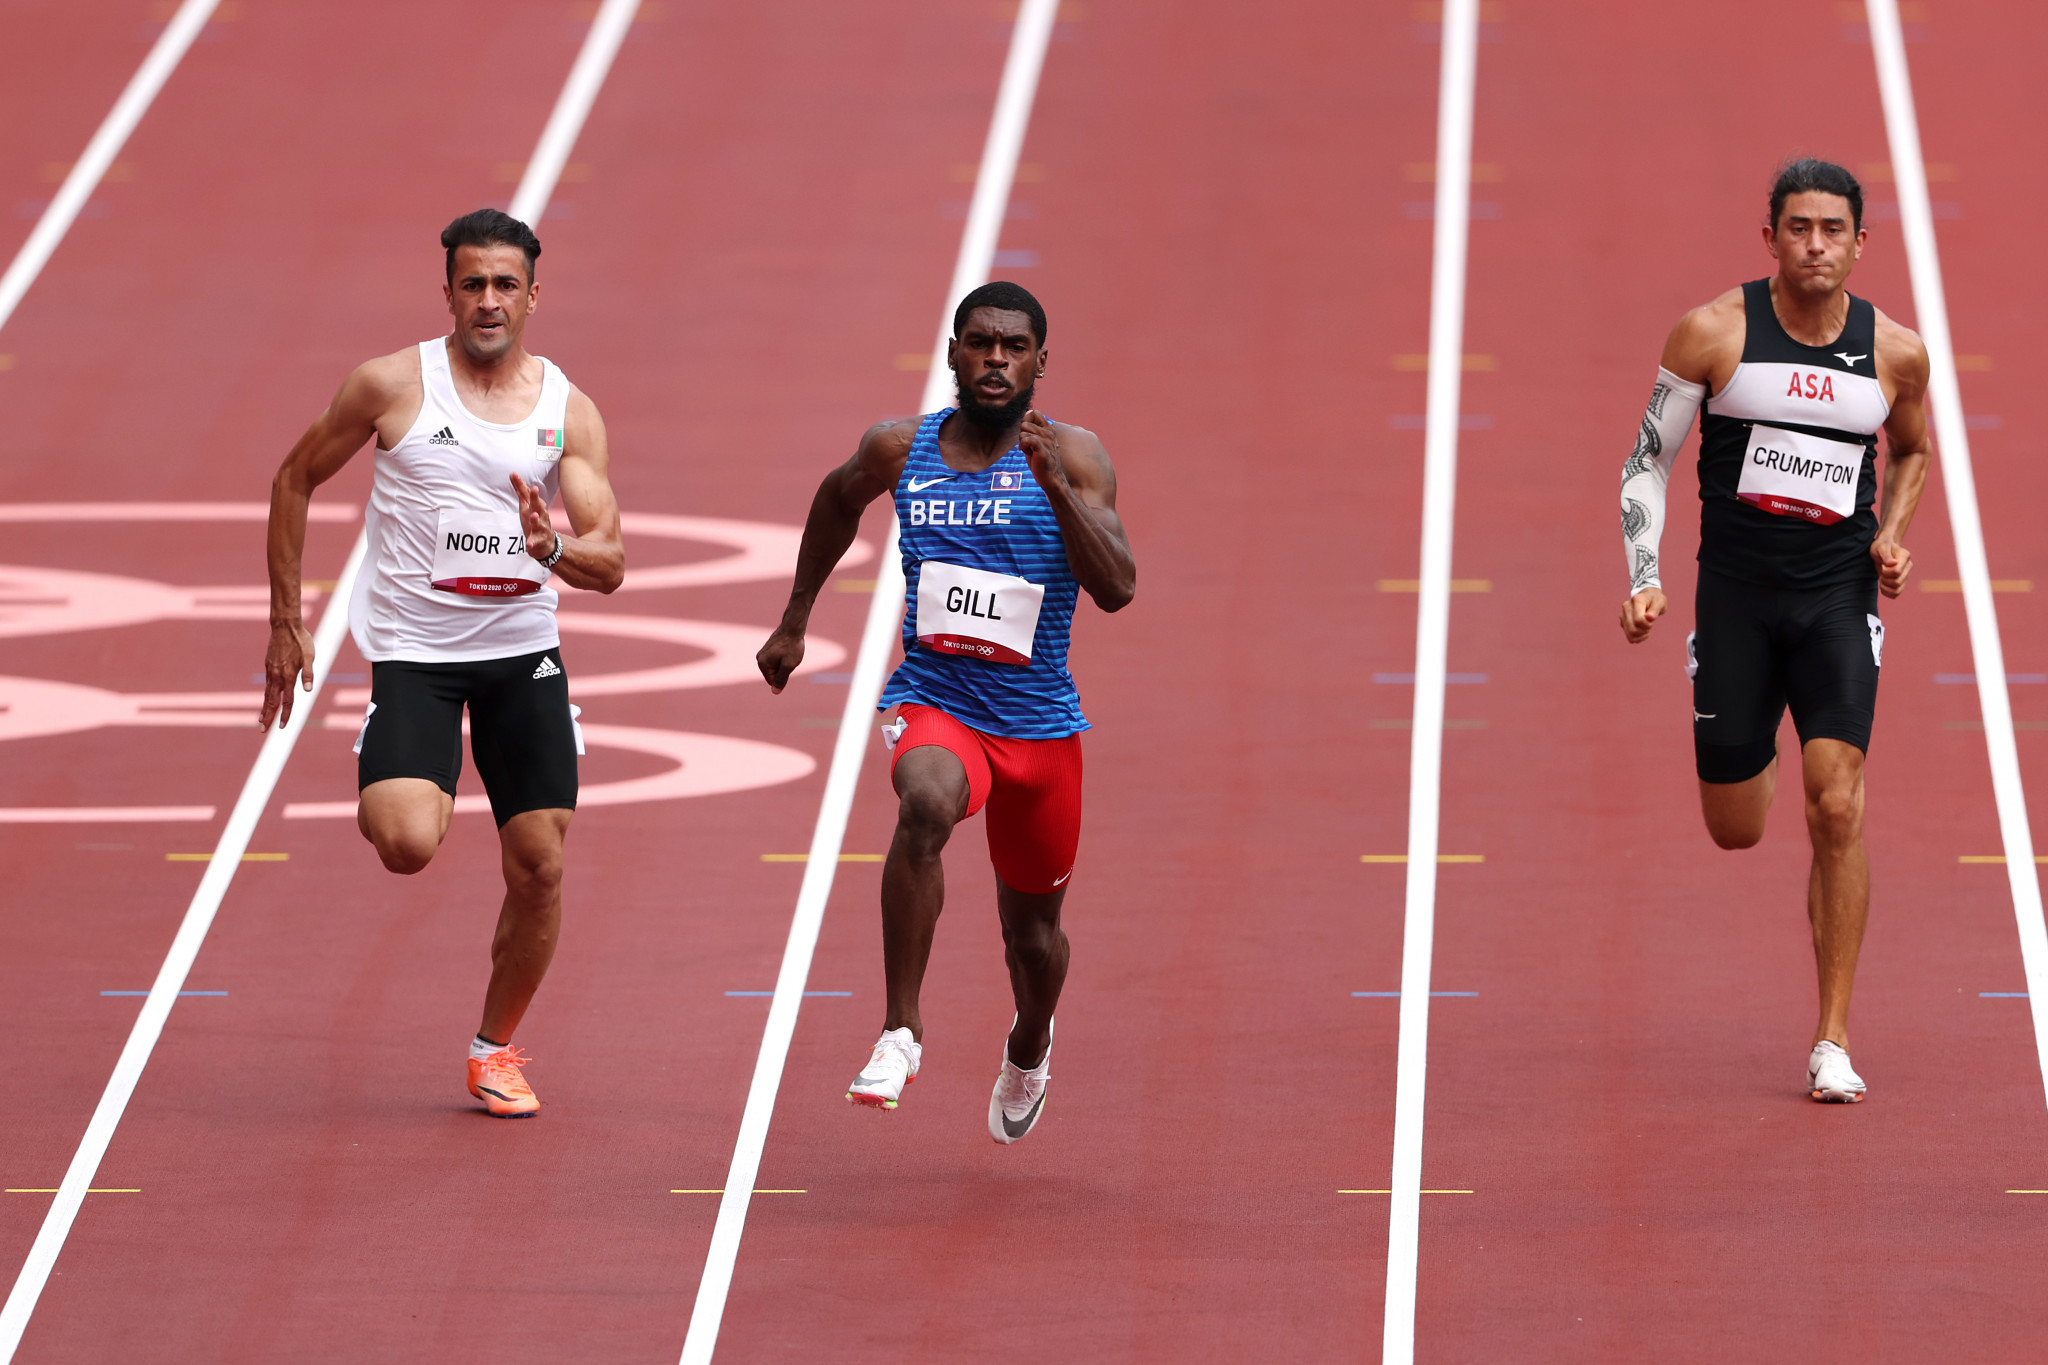 Nathan Crumpton, right, also competed in athletics for American Samoa at the Tokyo 2020 Olympics ©Getty Images